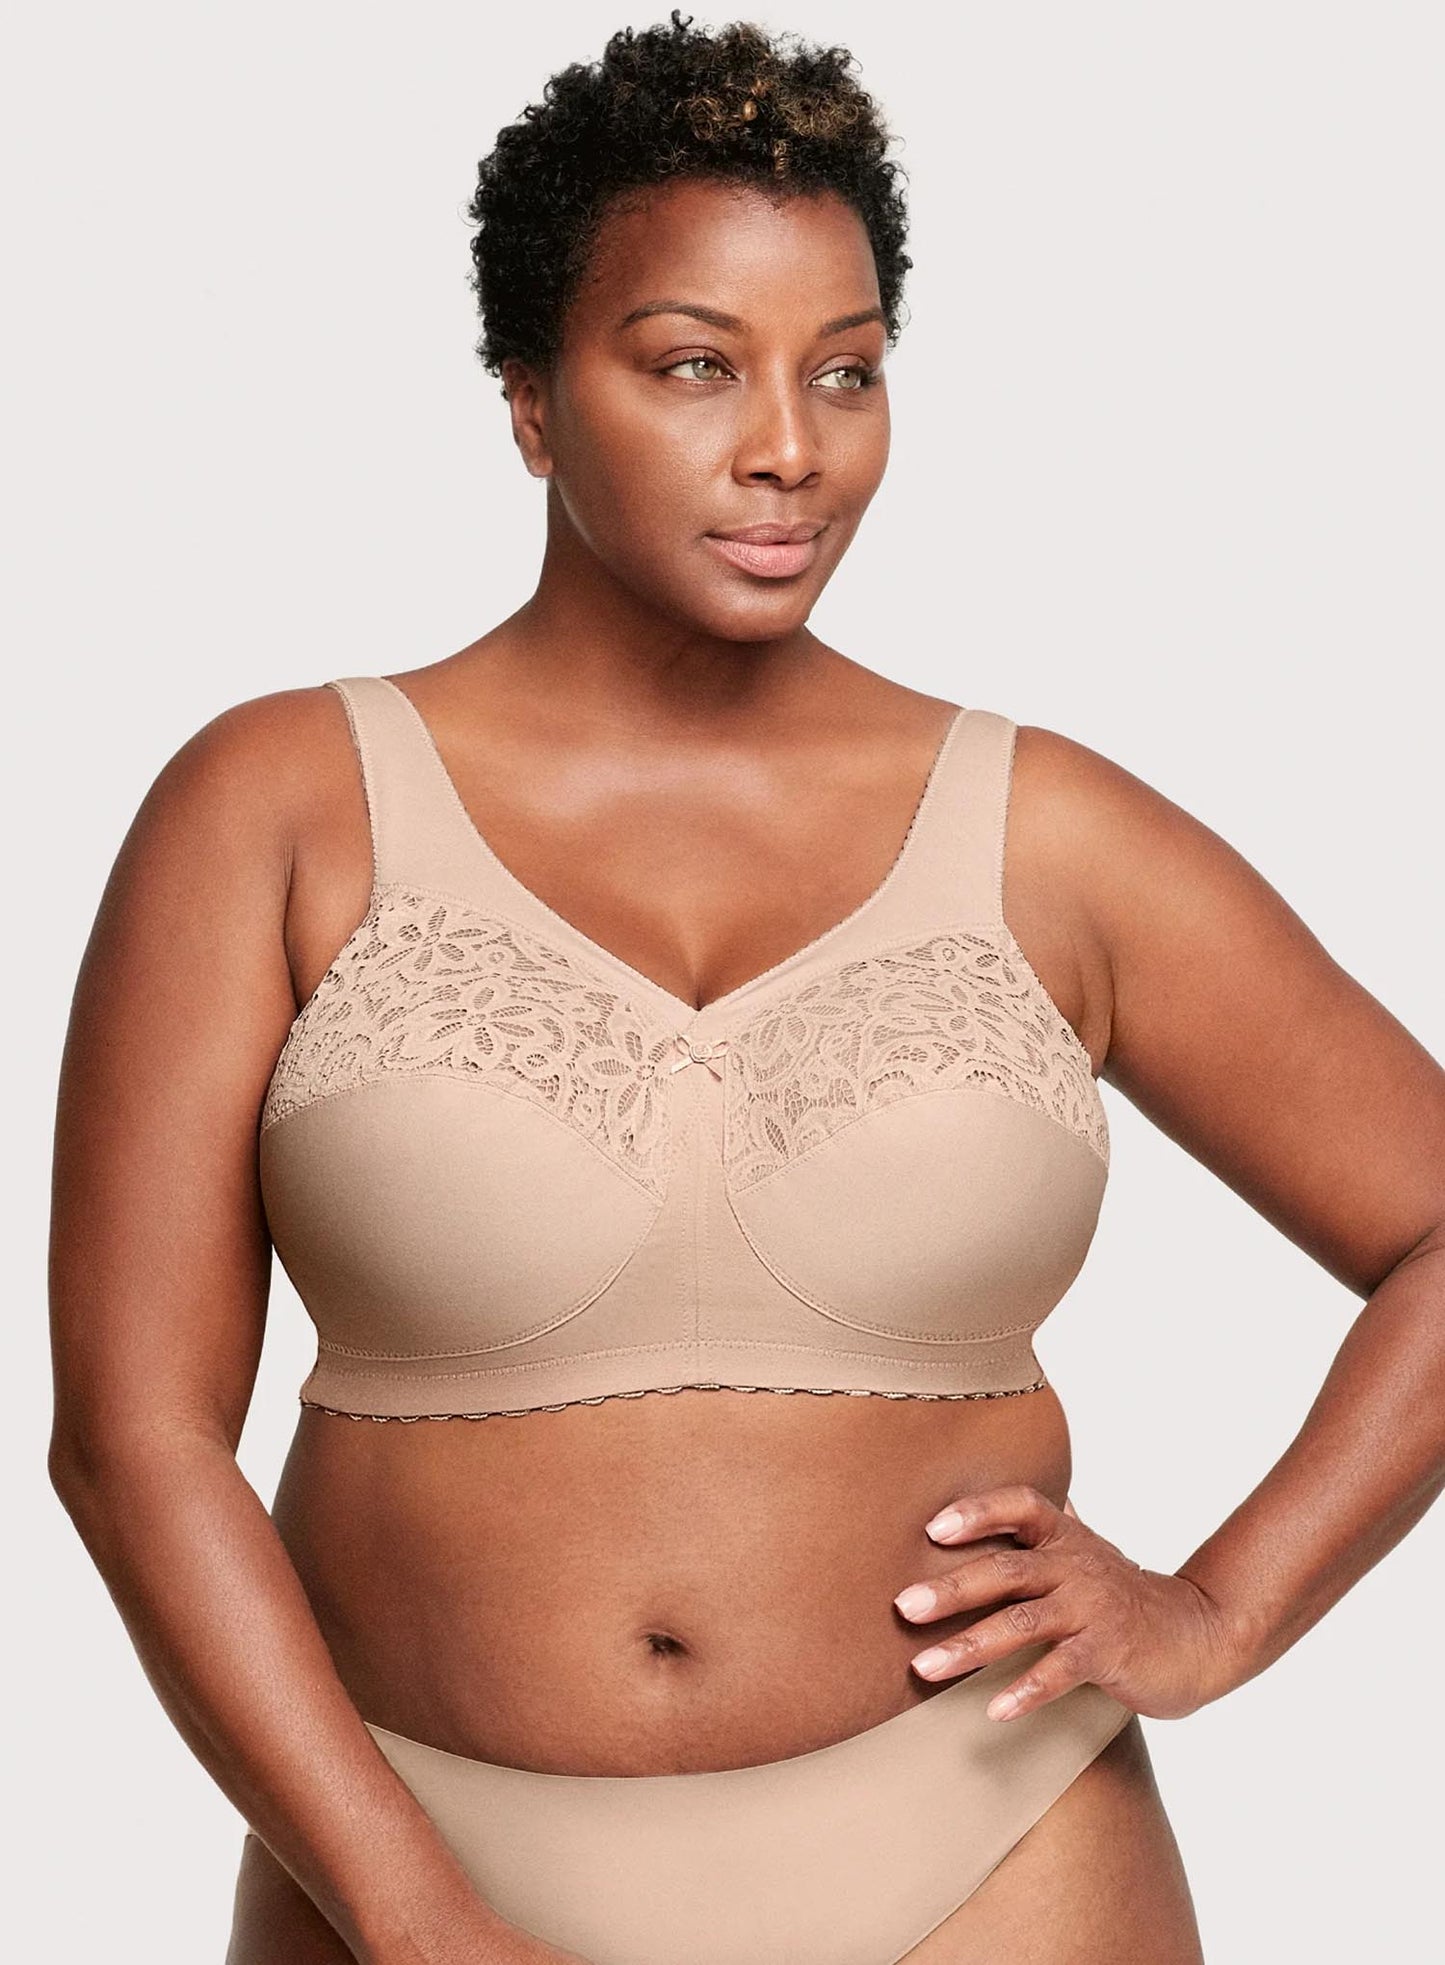 Minimizer Support Bra, Glamorous Full-Cup Full-Busted Bra, Full Coverage  and Back Smoothing, MagicLift Cotton Cup